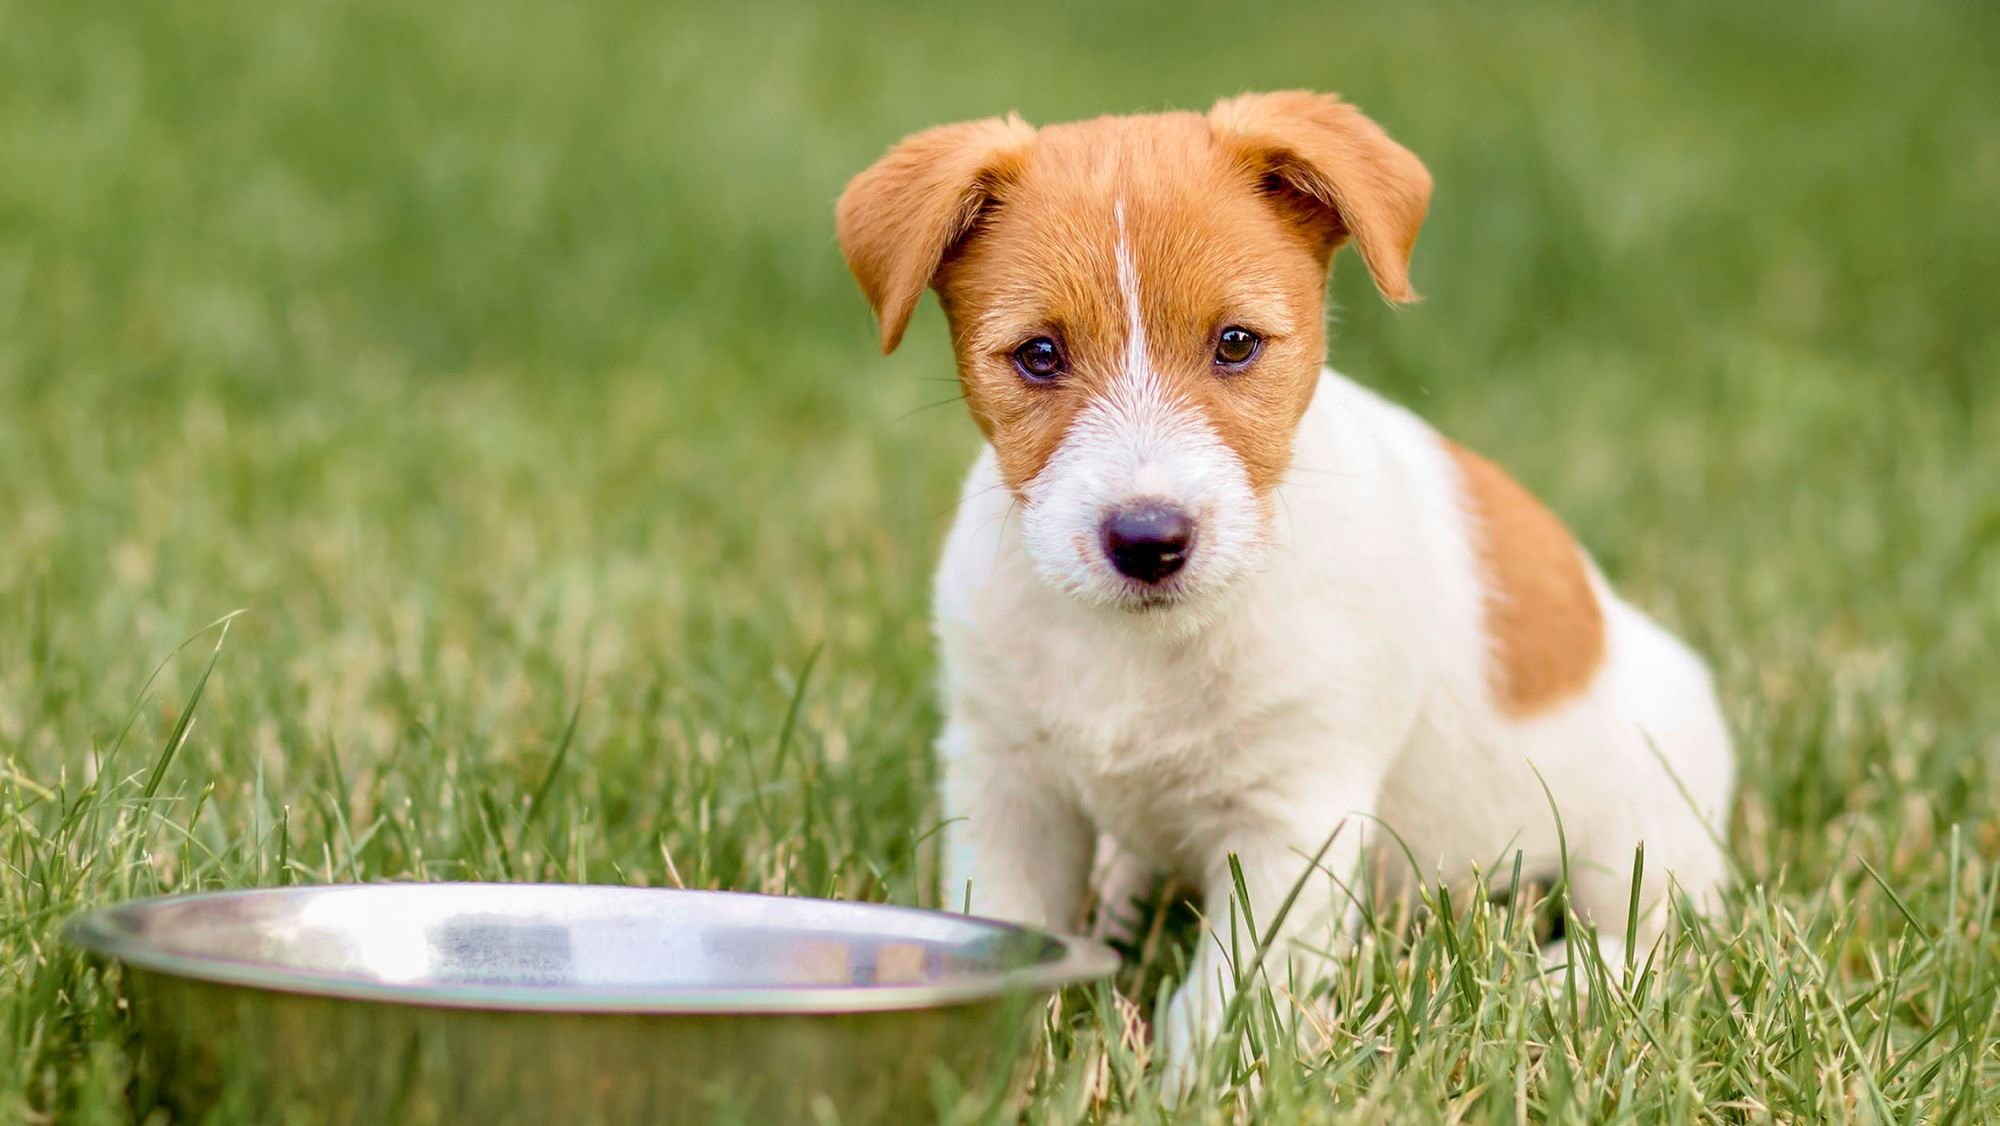 Jack Russell Terrier puppy sitting outdoors in grass next to a feeding bowl